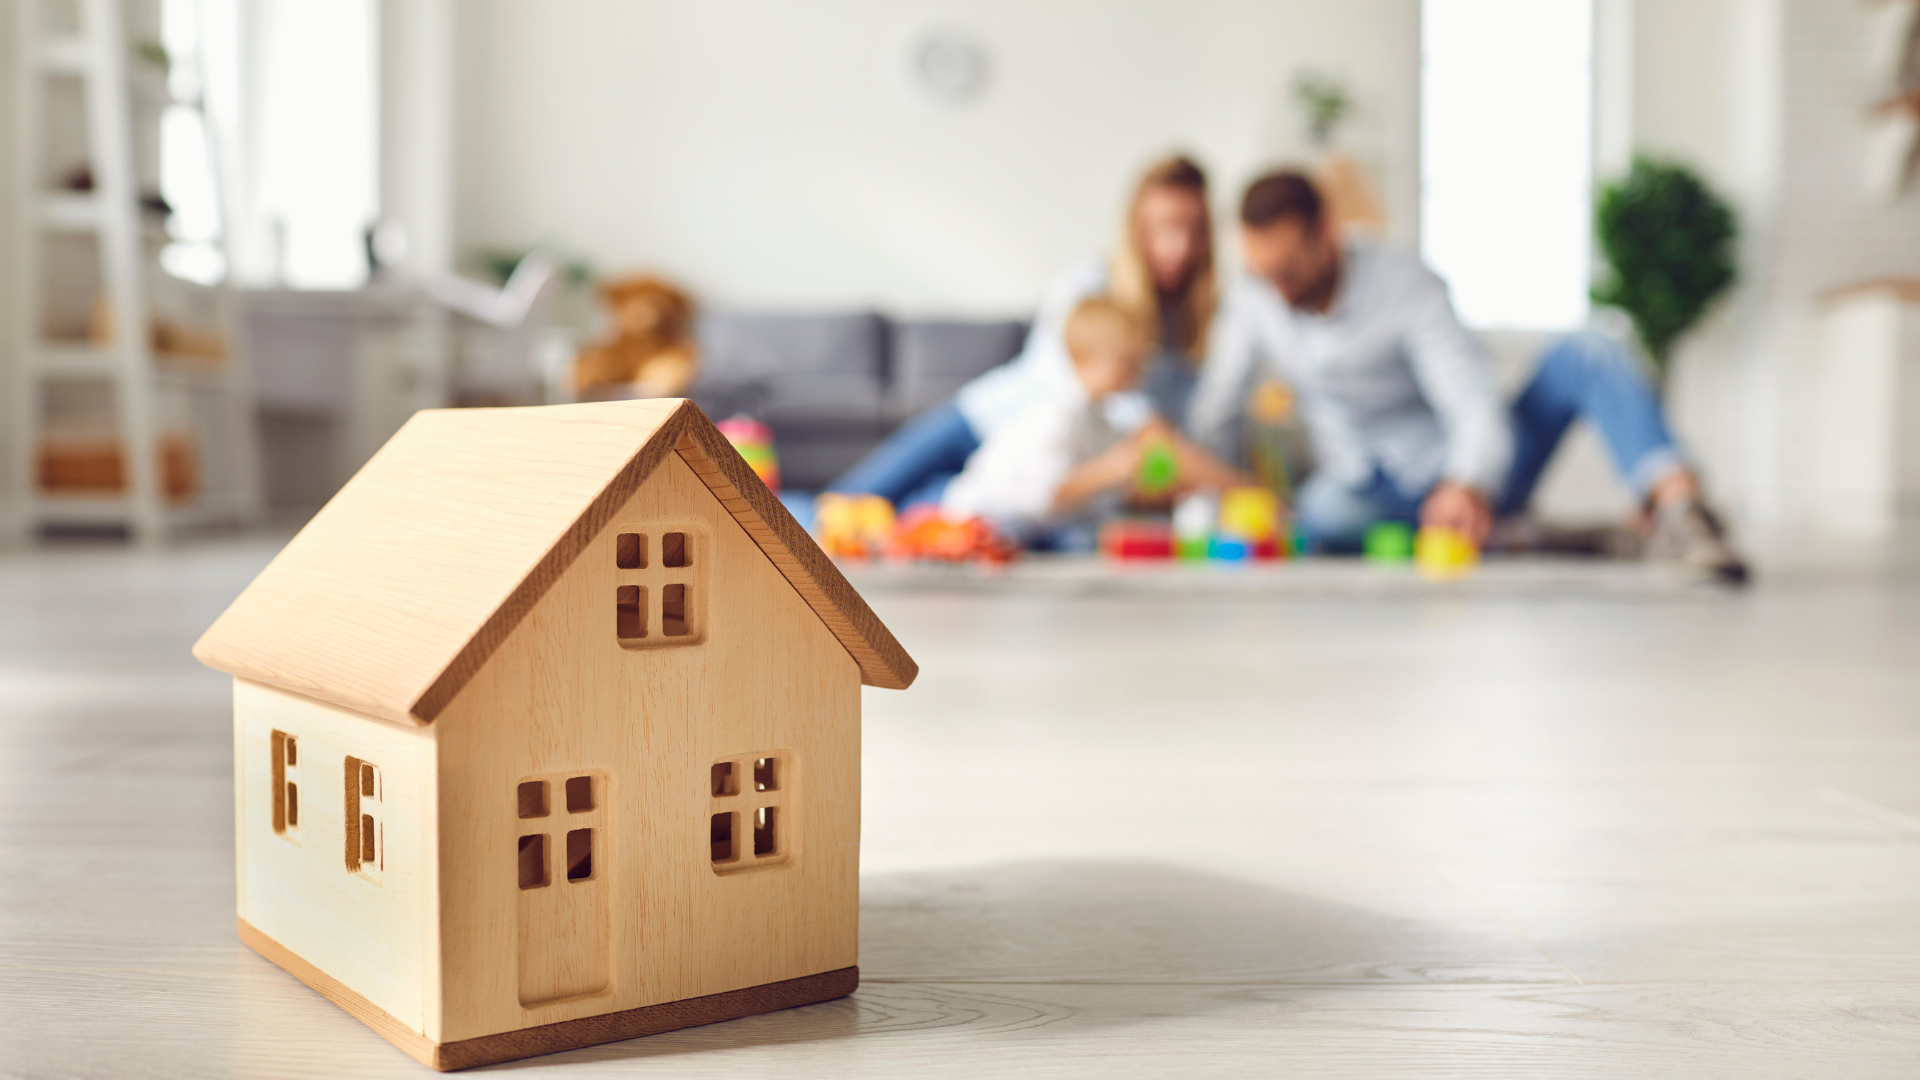 Lenders Mortgage Insurance (LMI) - Parents playing with their baby and there is a dummy wooden house in front of them